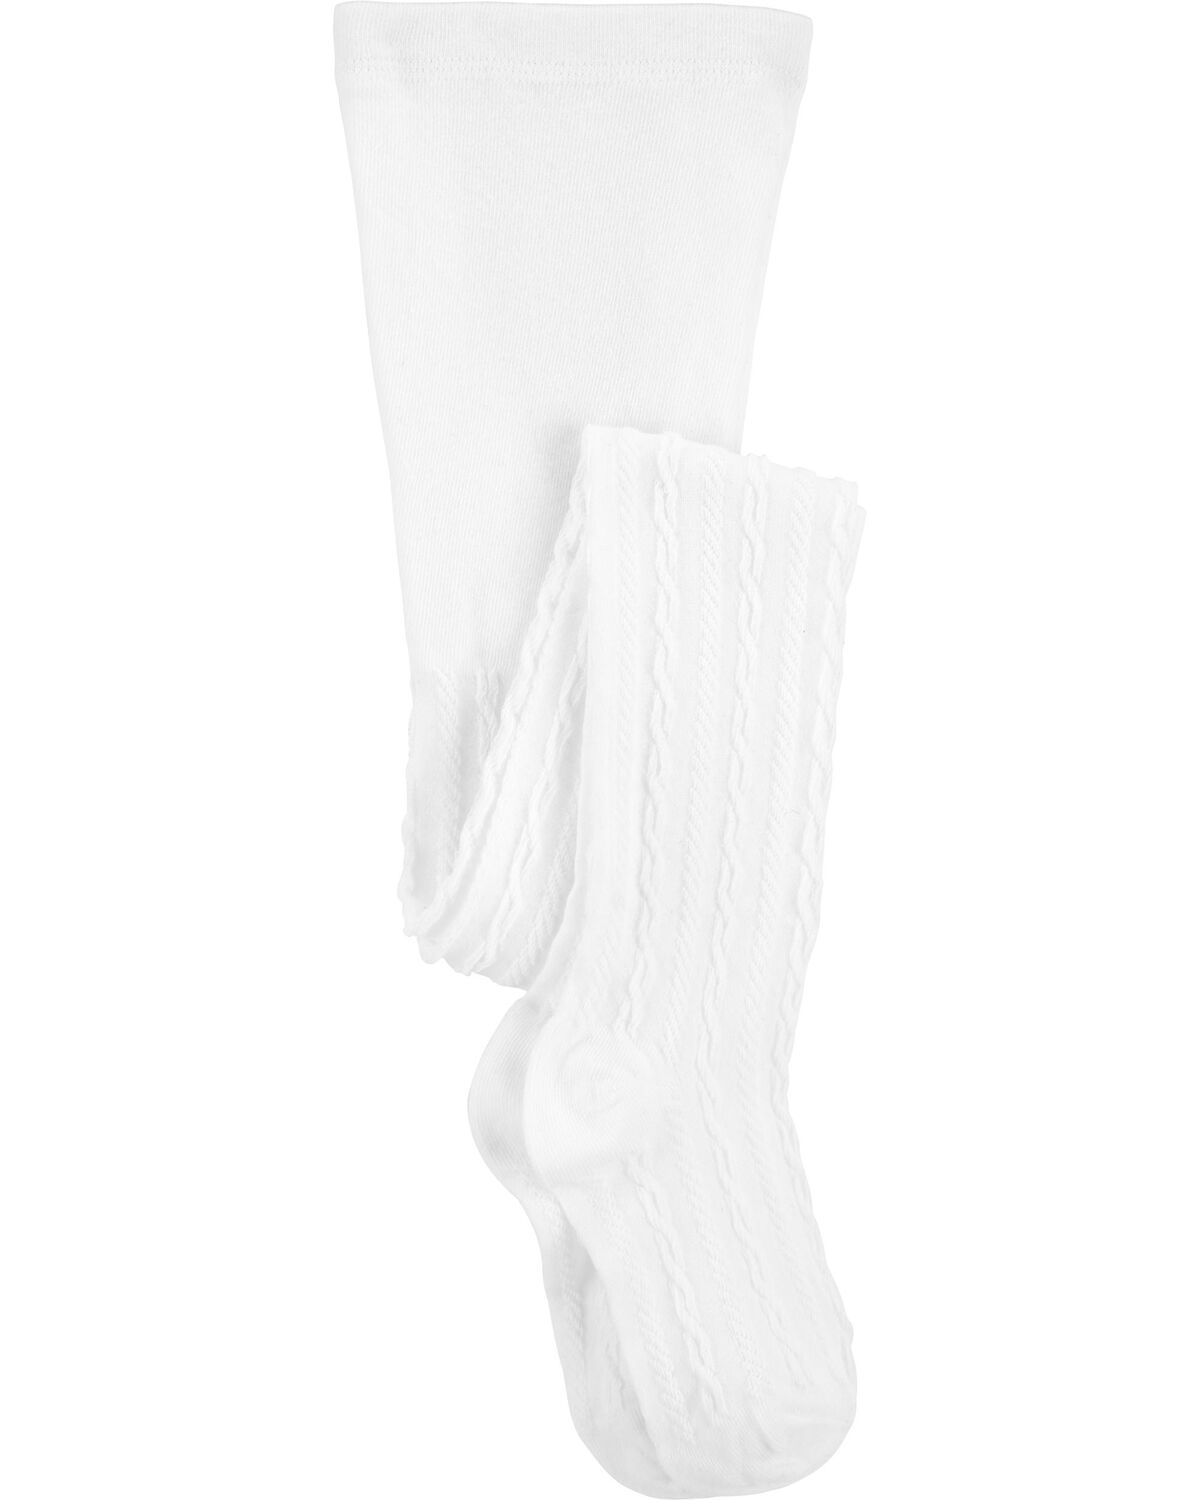 White Baby Cable Knit Tights | carters.com | Carter's